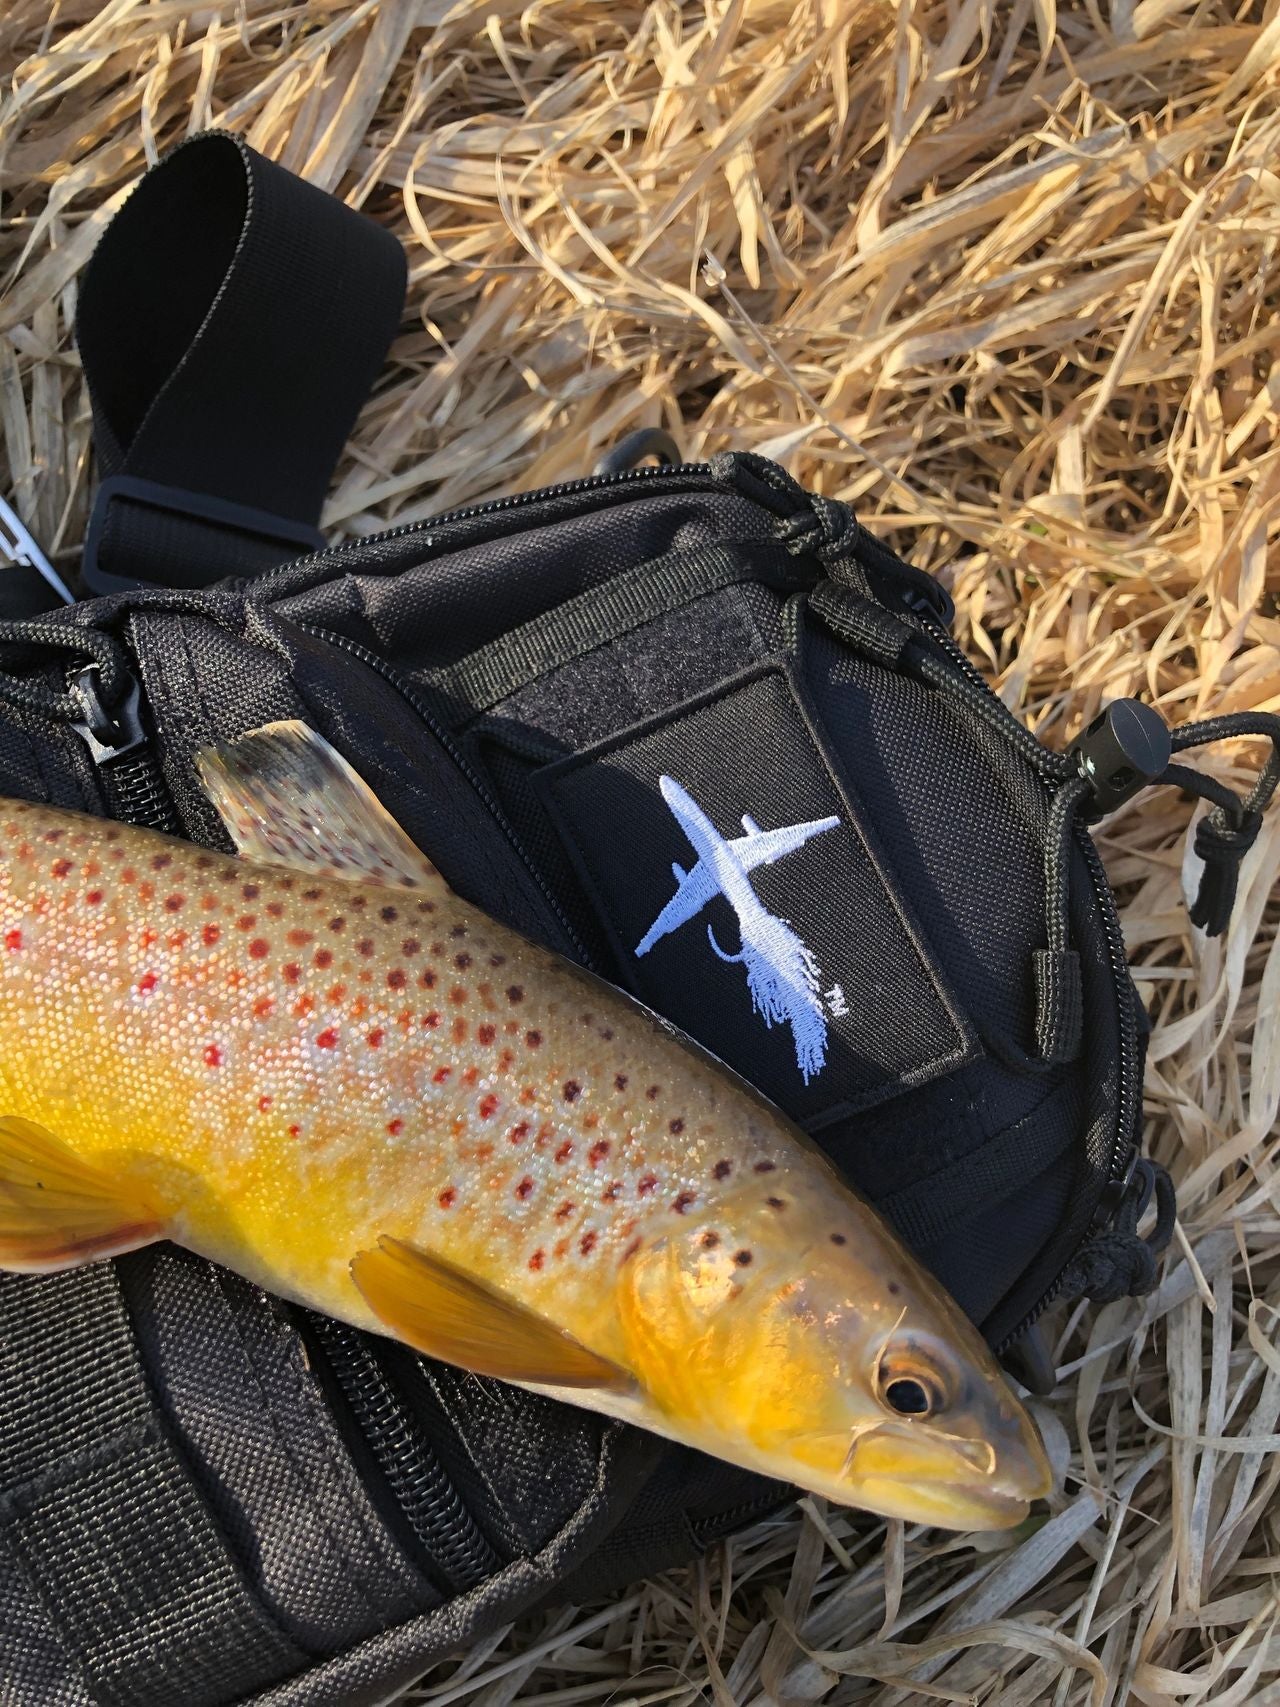 What to Bring on a Fly Fishing Outing